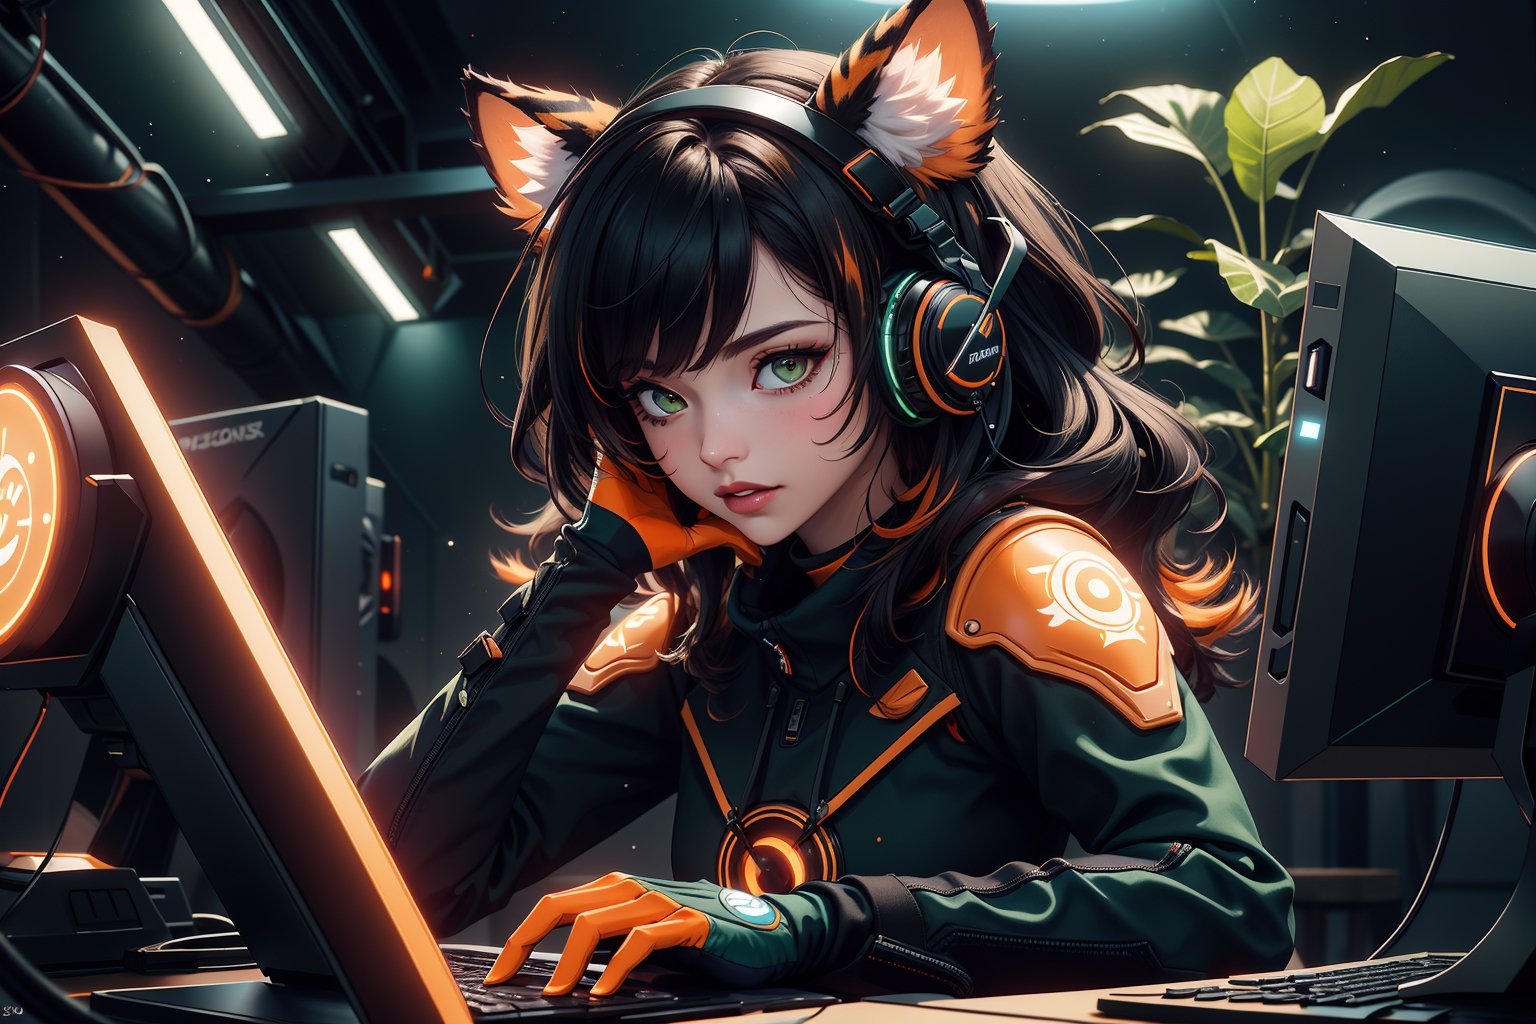 (masterpiece:1.1),(highest quality:1.1),(HDR:1),extreme quality,cg,(negative space),detailed face+eyes,1girl,in Internet cafe playing games, fox ears,animal ear fluff,(plants:1.18),(fractal art),(bright colors),splashes of color background,colors mashing,paint splatter,complimentary colors,neon,(thunder tiger),compassionate,electric,limited palette,synthwave,fine art,tan skin,upper body,(green and orange:1.2),time stop,sy3,SMM,inblackholetech,More Detail